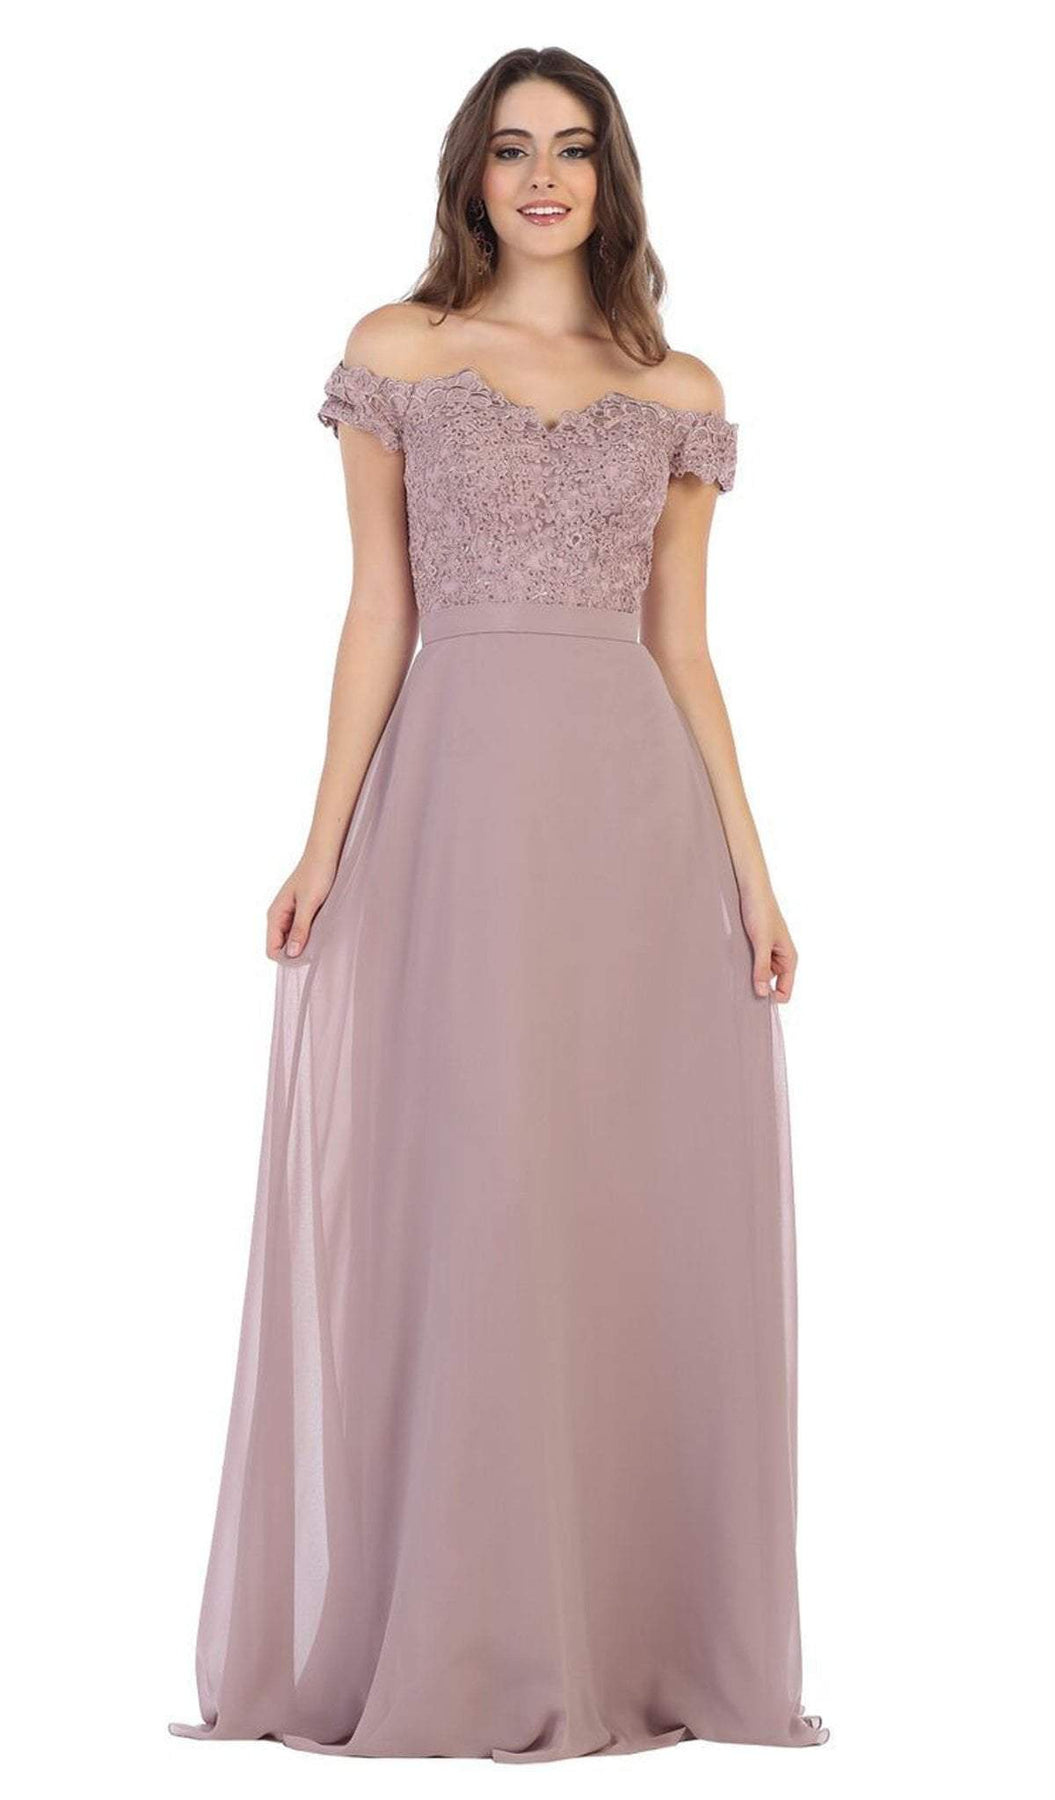 May Queen - MQ1601 Lace Appliqued Chiffon Off Shoulder Formal Gown Bridesmaid Dresses 4 / Mauve